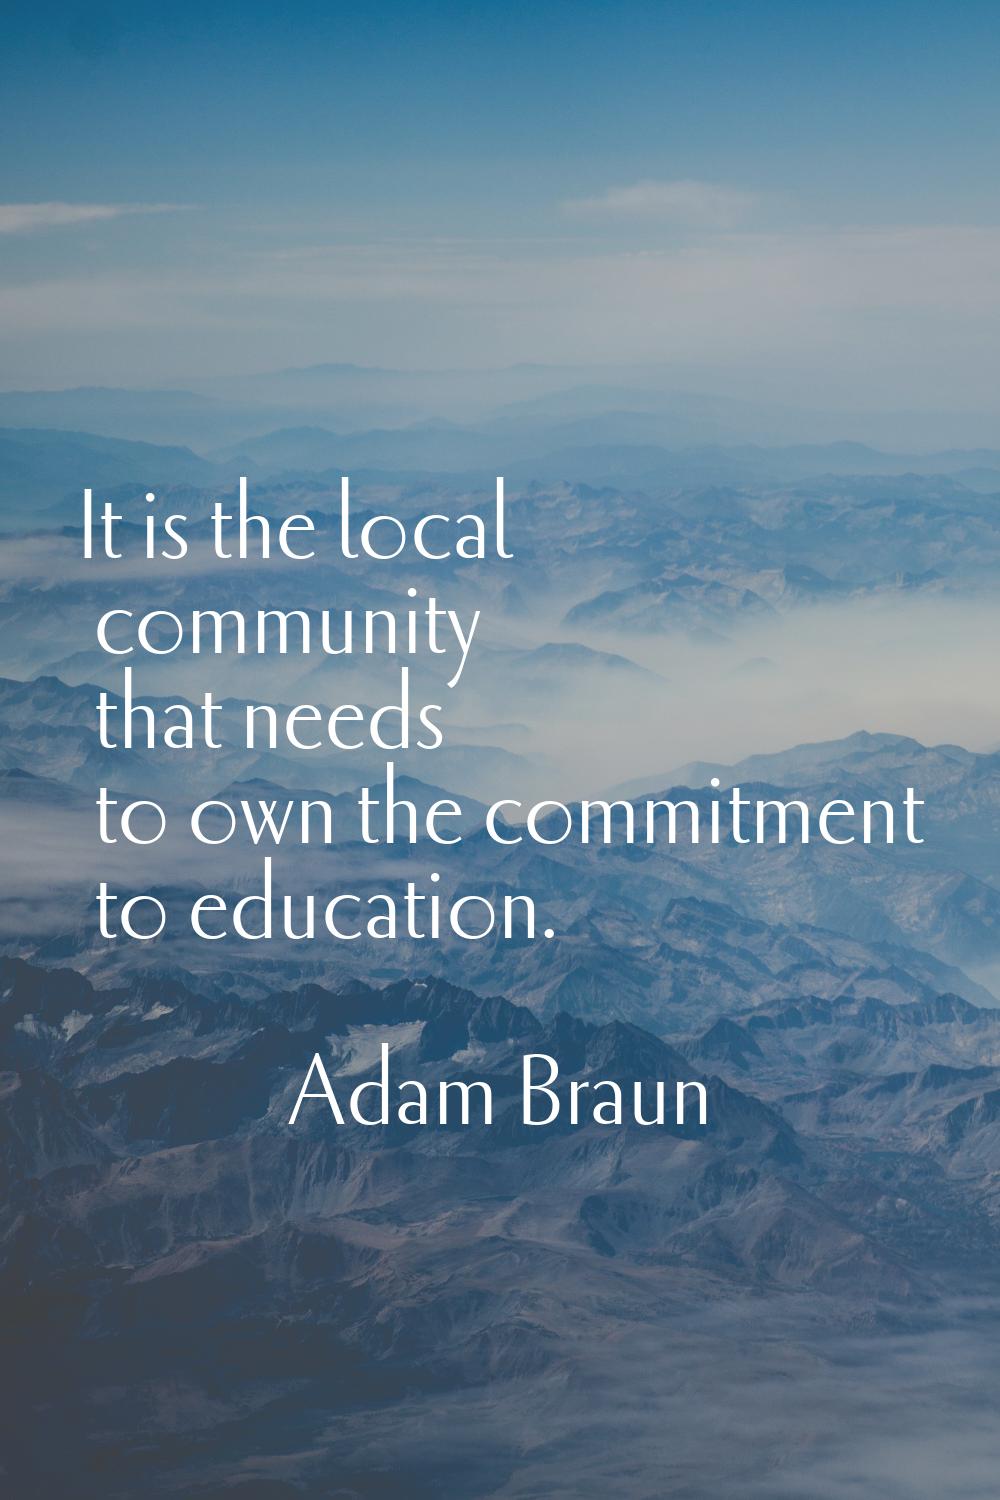 It is the local community that needs to own the commitment to education.